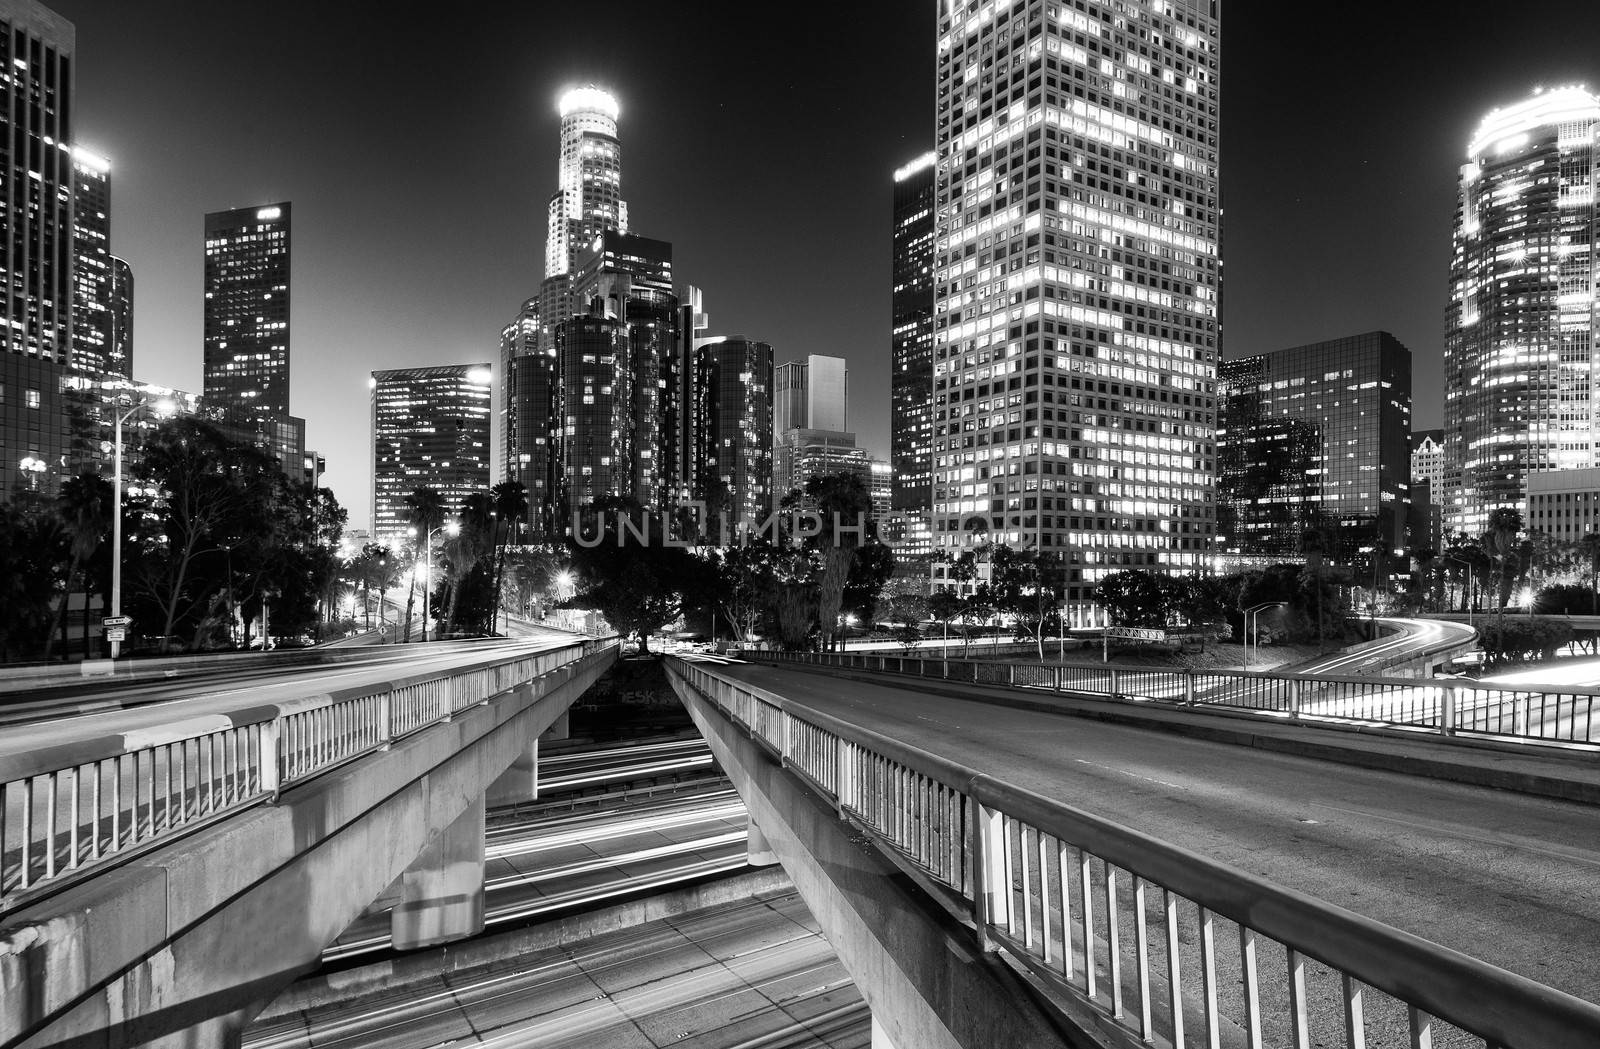 Downtown Los Angeles by CelsoDiniz